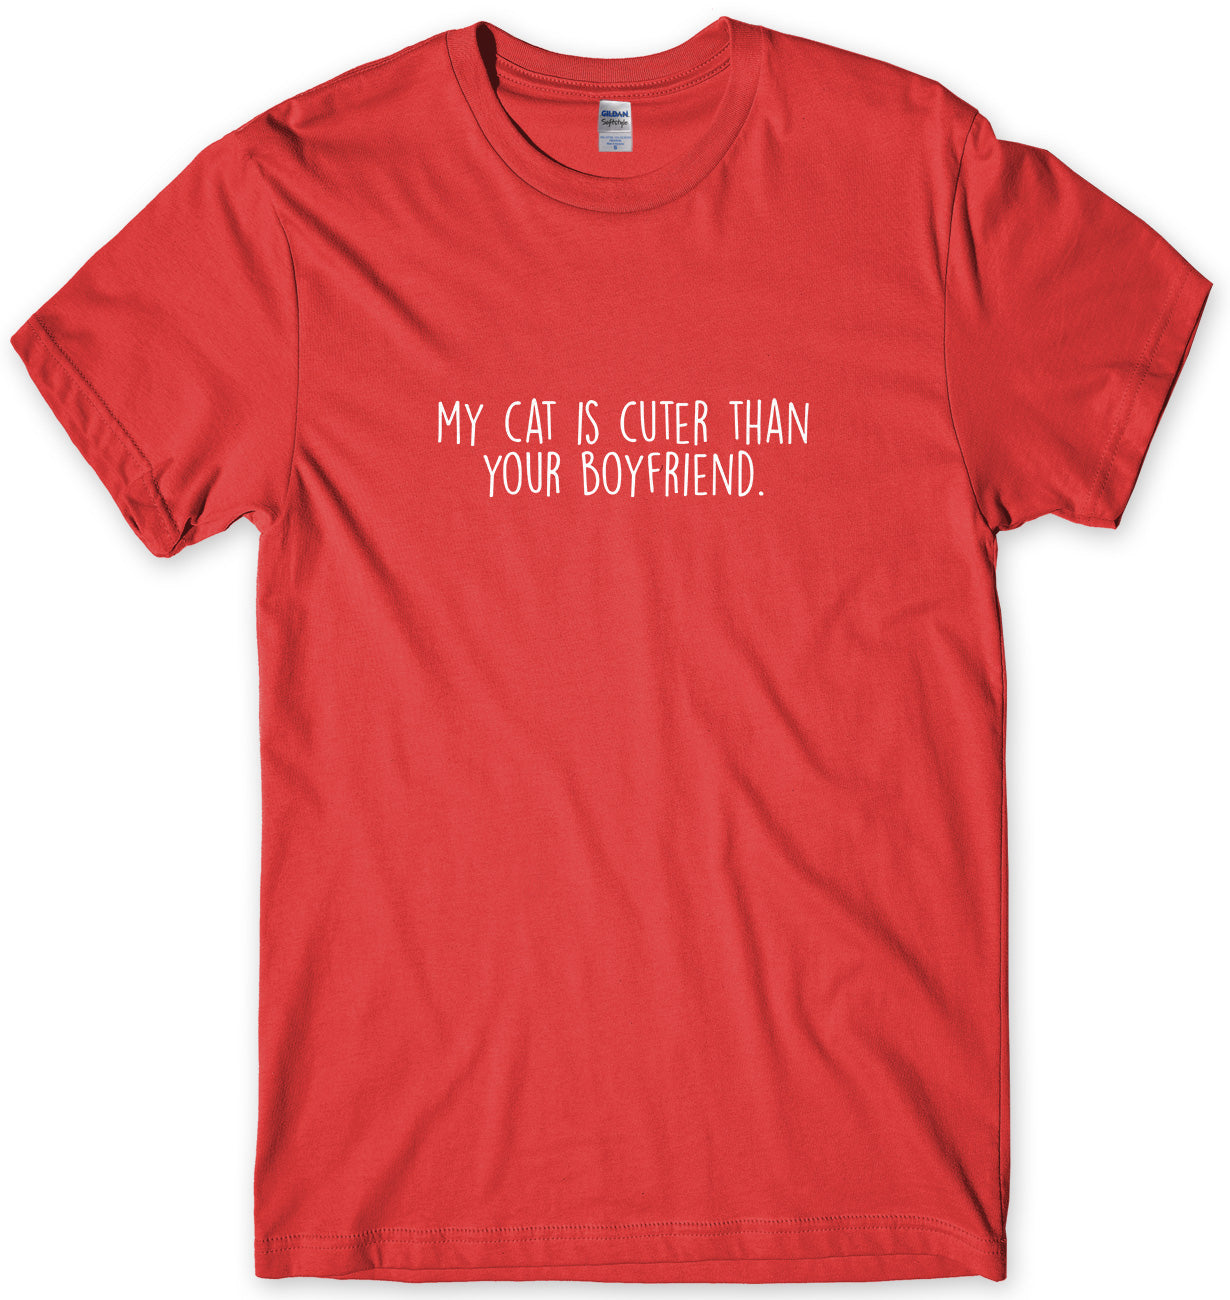 My Cat Is Cuter Than Your Boyfriend Mens Unisex Style T-Shirt